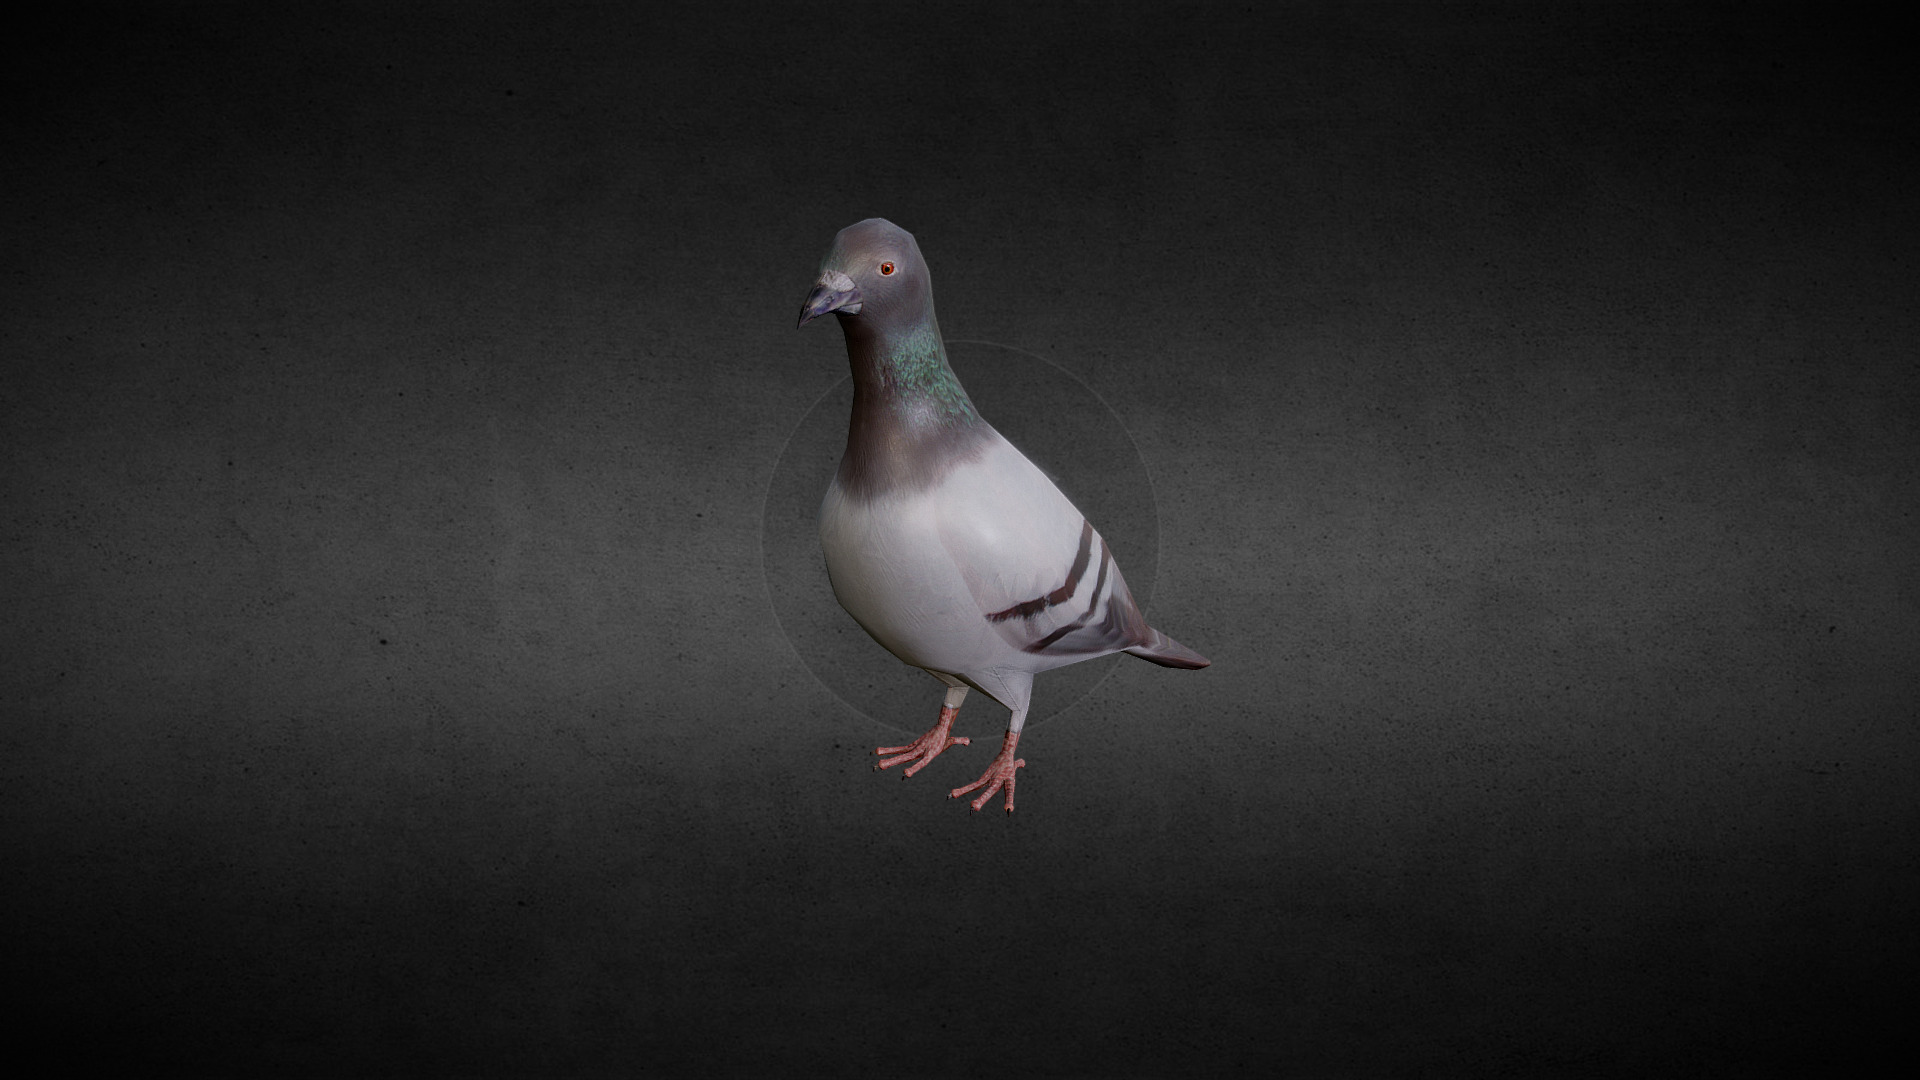 3D model Paloma LP - This is a 3D model of the Paloma LP. The 3D model is about a bird standing on a surface.